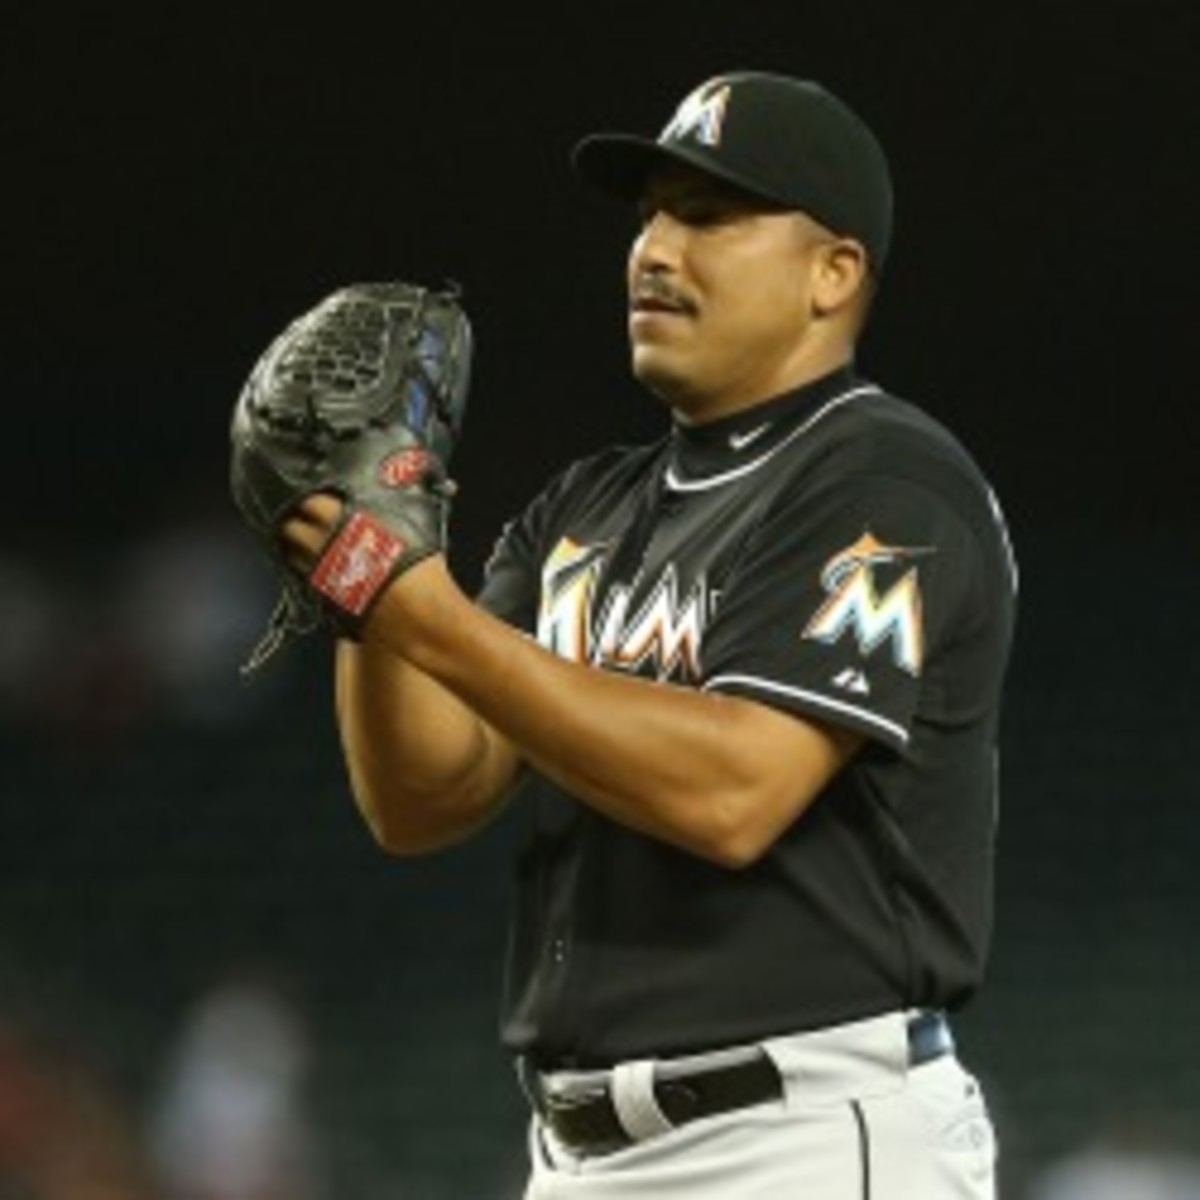 Any deal for Carlos Zambrano to the Phillies is premature says their GM. (Christian Petersen/Getty Images)